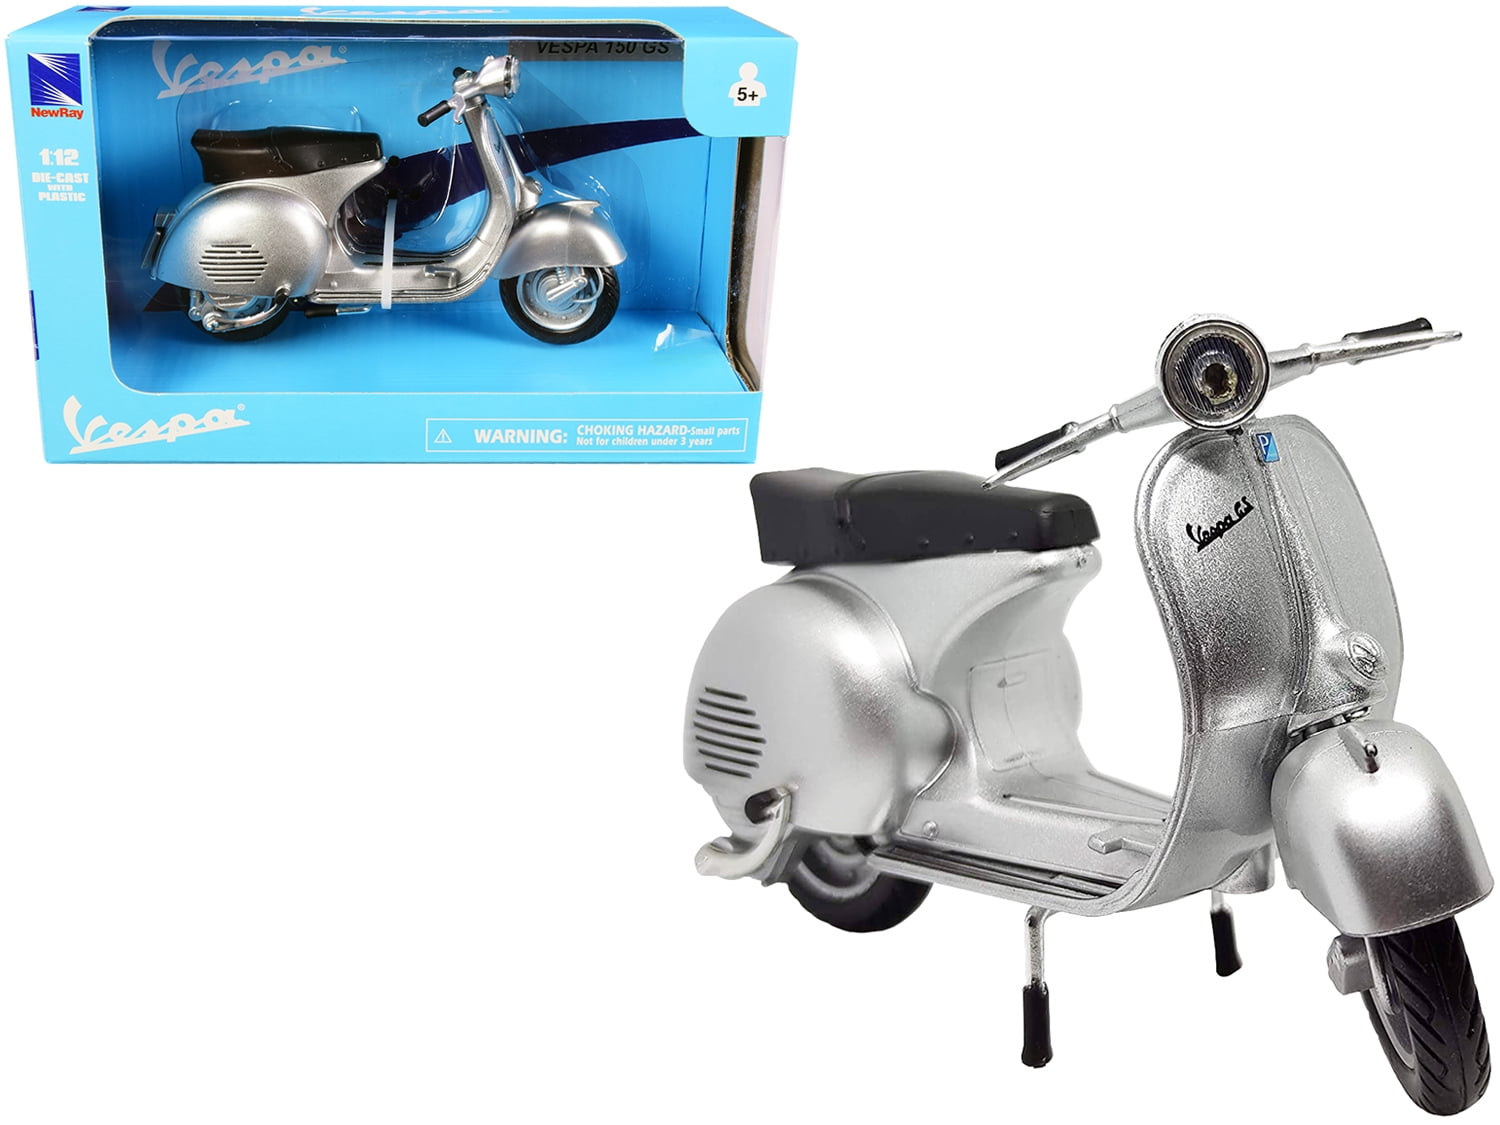 VESPA 150 GS SILVER METALLIC 1/12 DIECAST MOTORCYCLE MODEL BY NEW